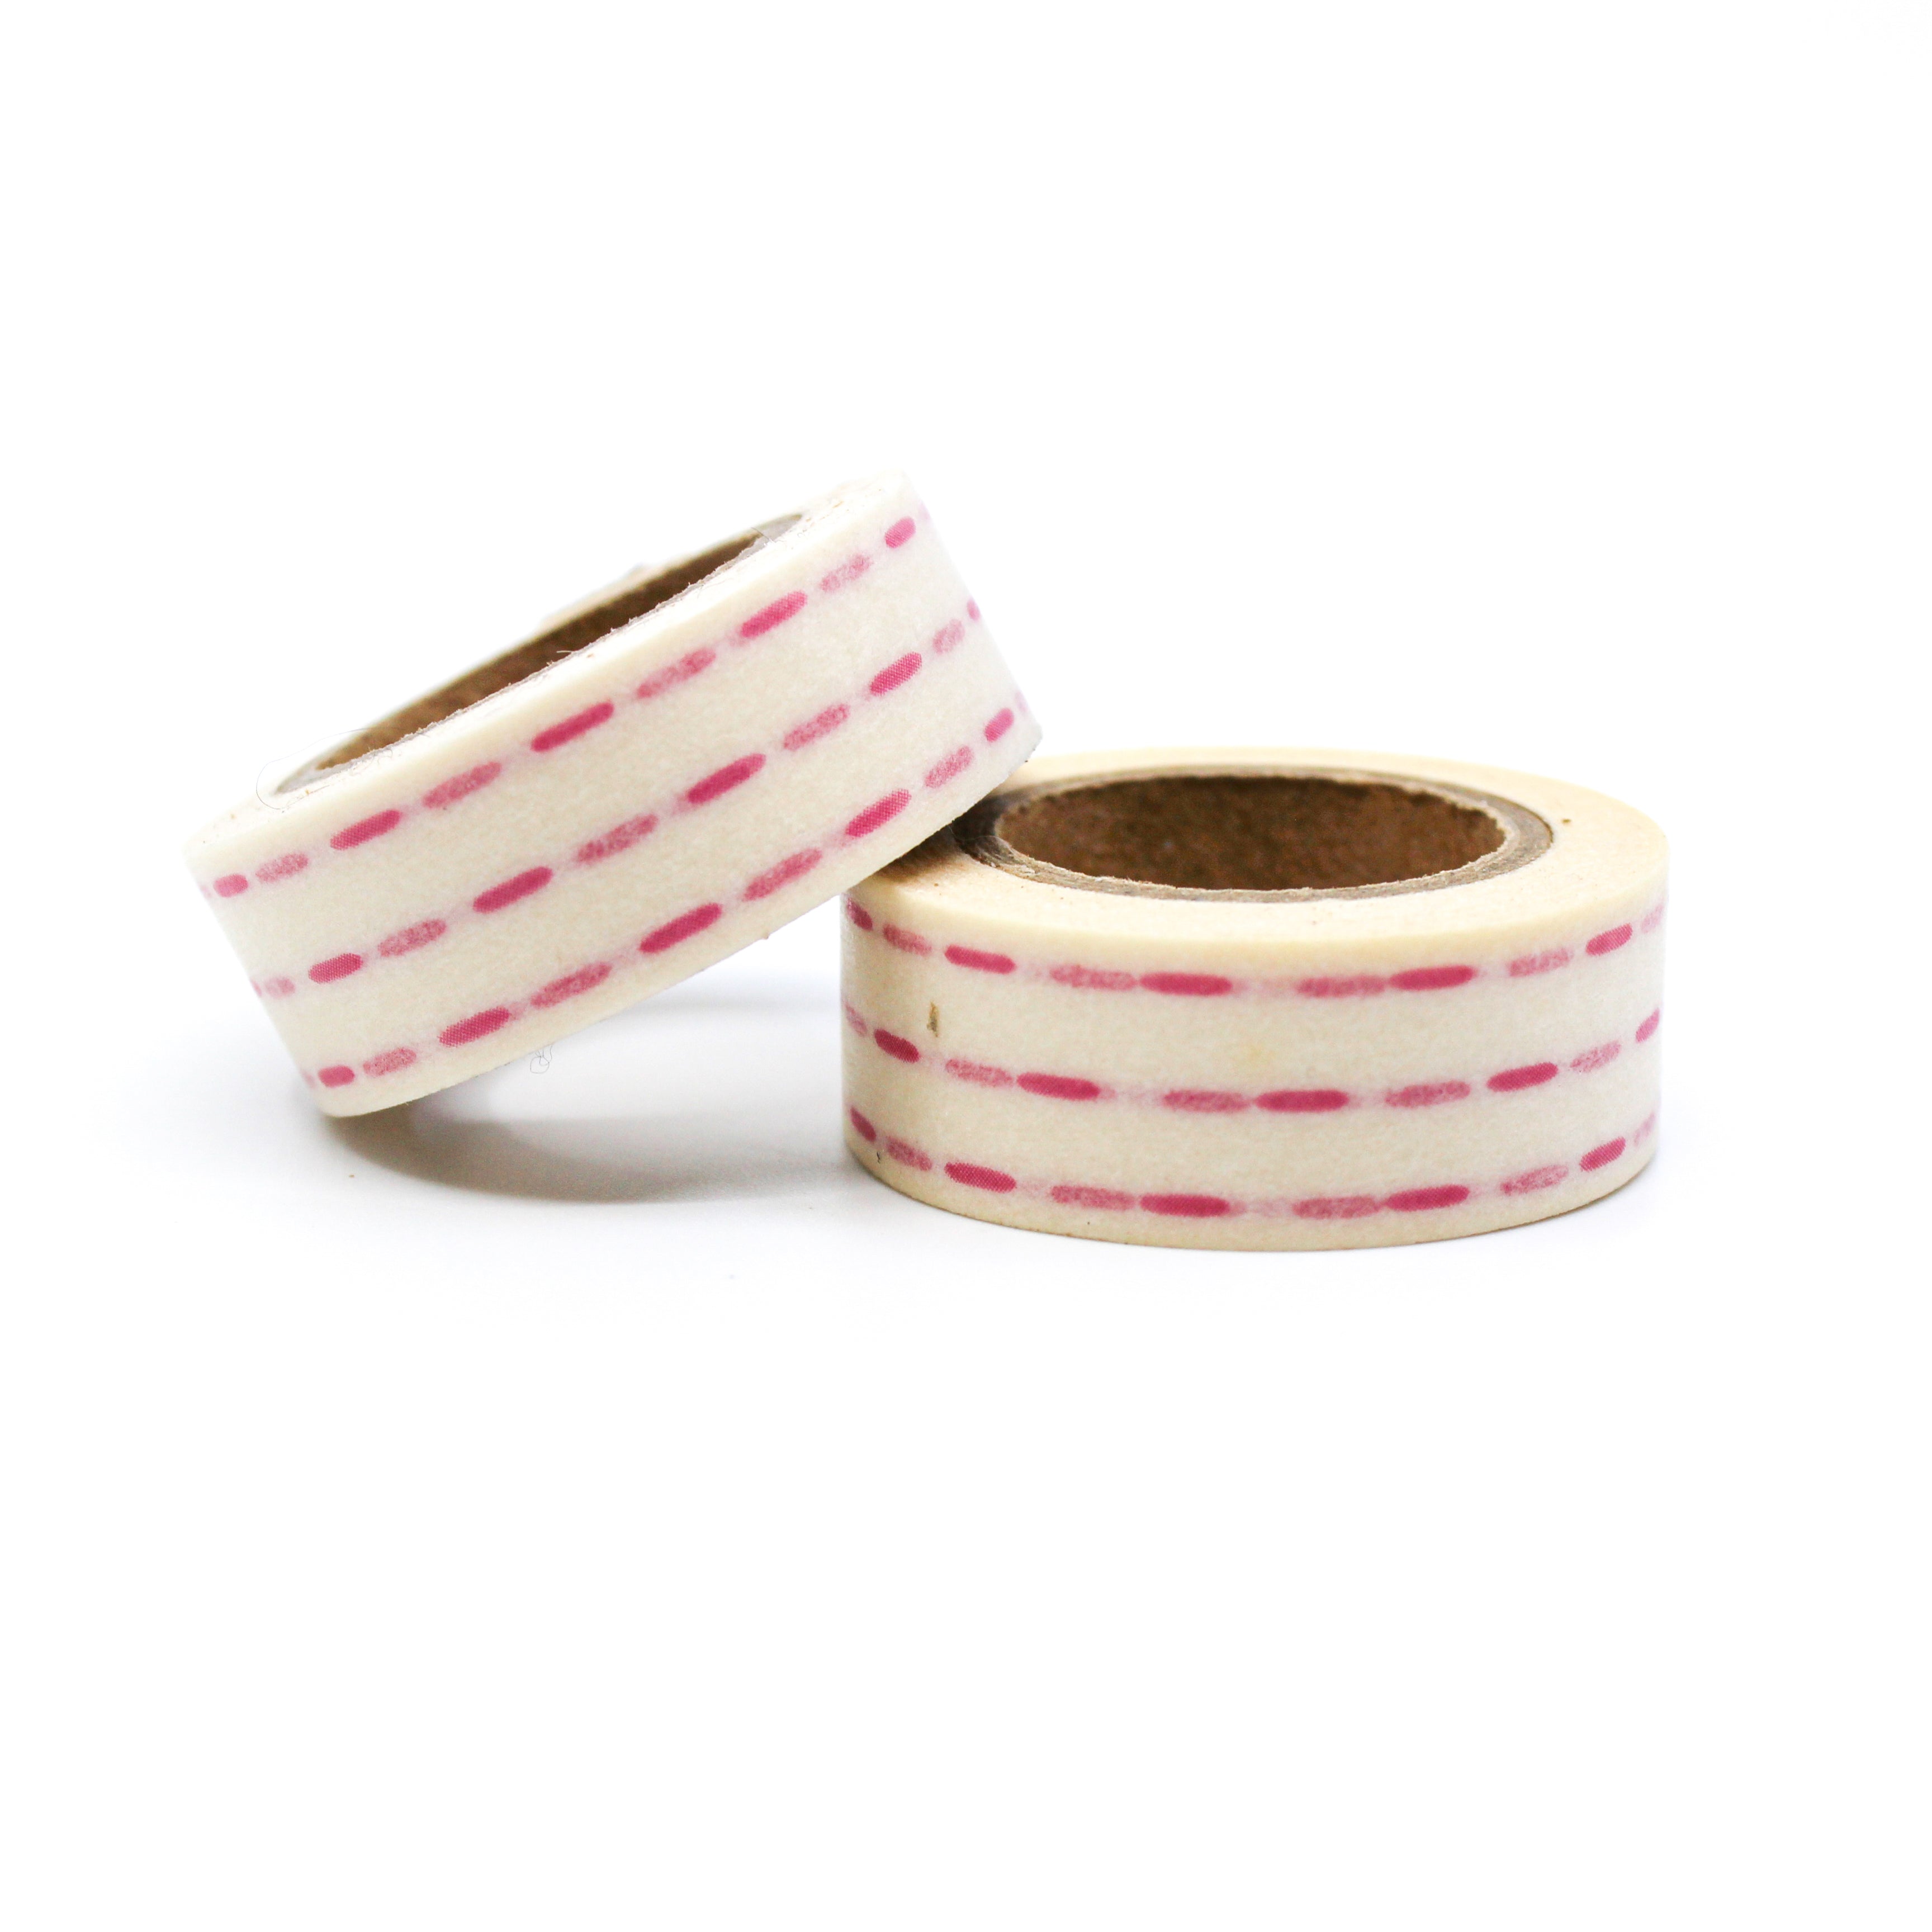 This is a pink dashed lines or dots for Journal Supplies, Scrapbooking washi tapes from BBB Supplies Craft Shop